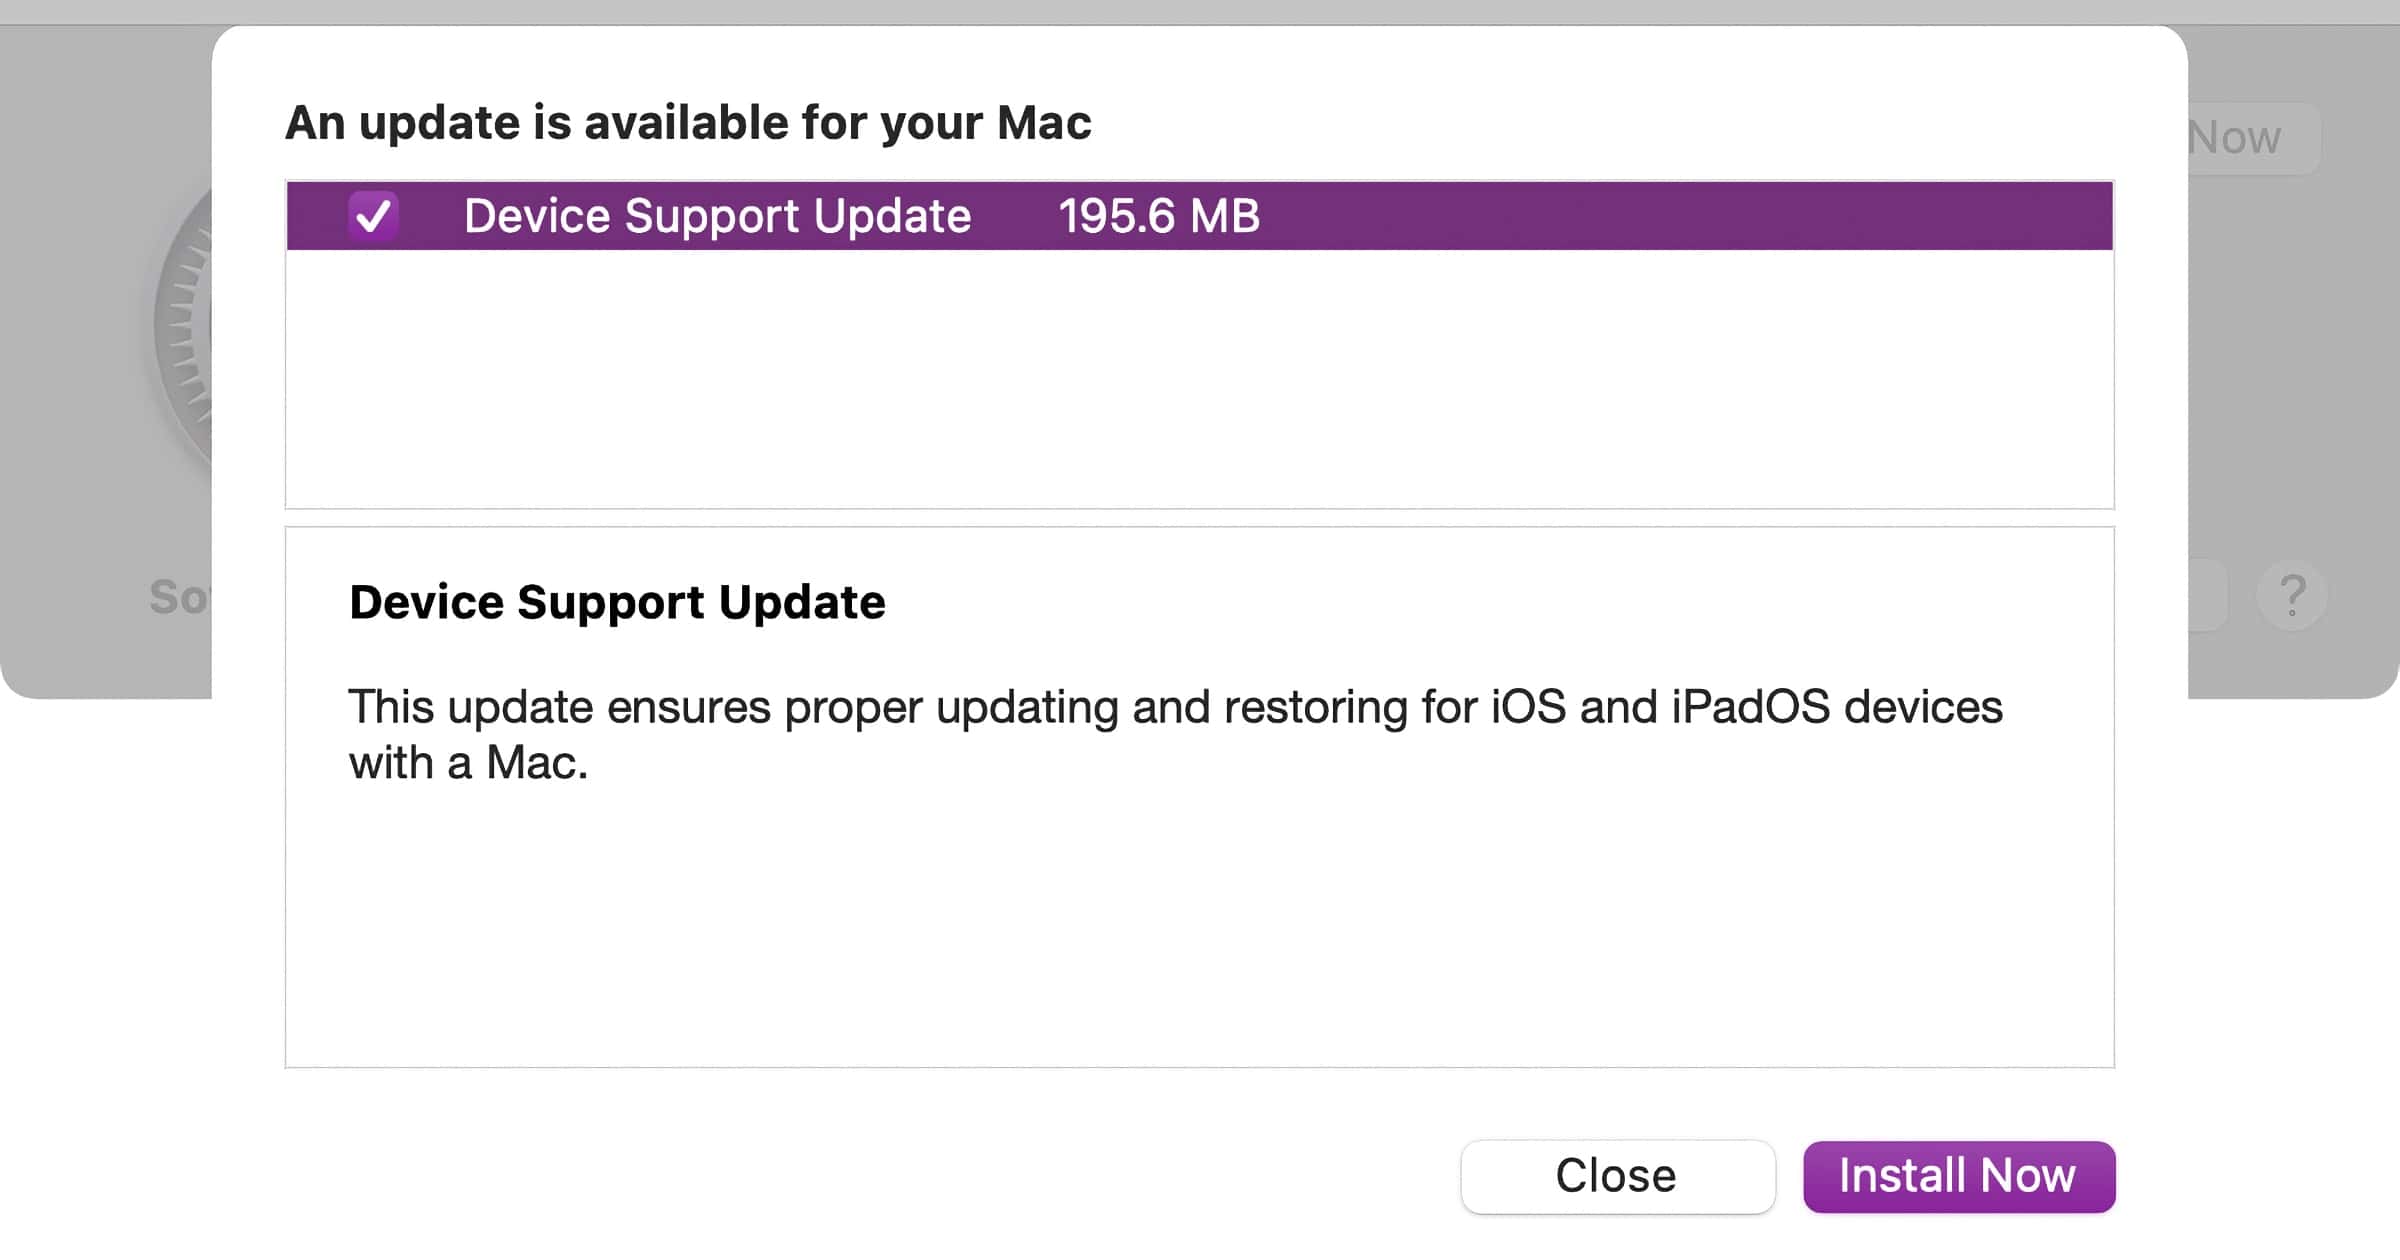 Mac Users Report Seeing a ‘Device Support Update’ Today